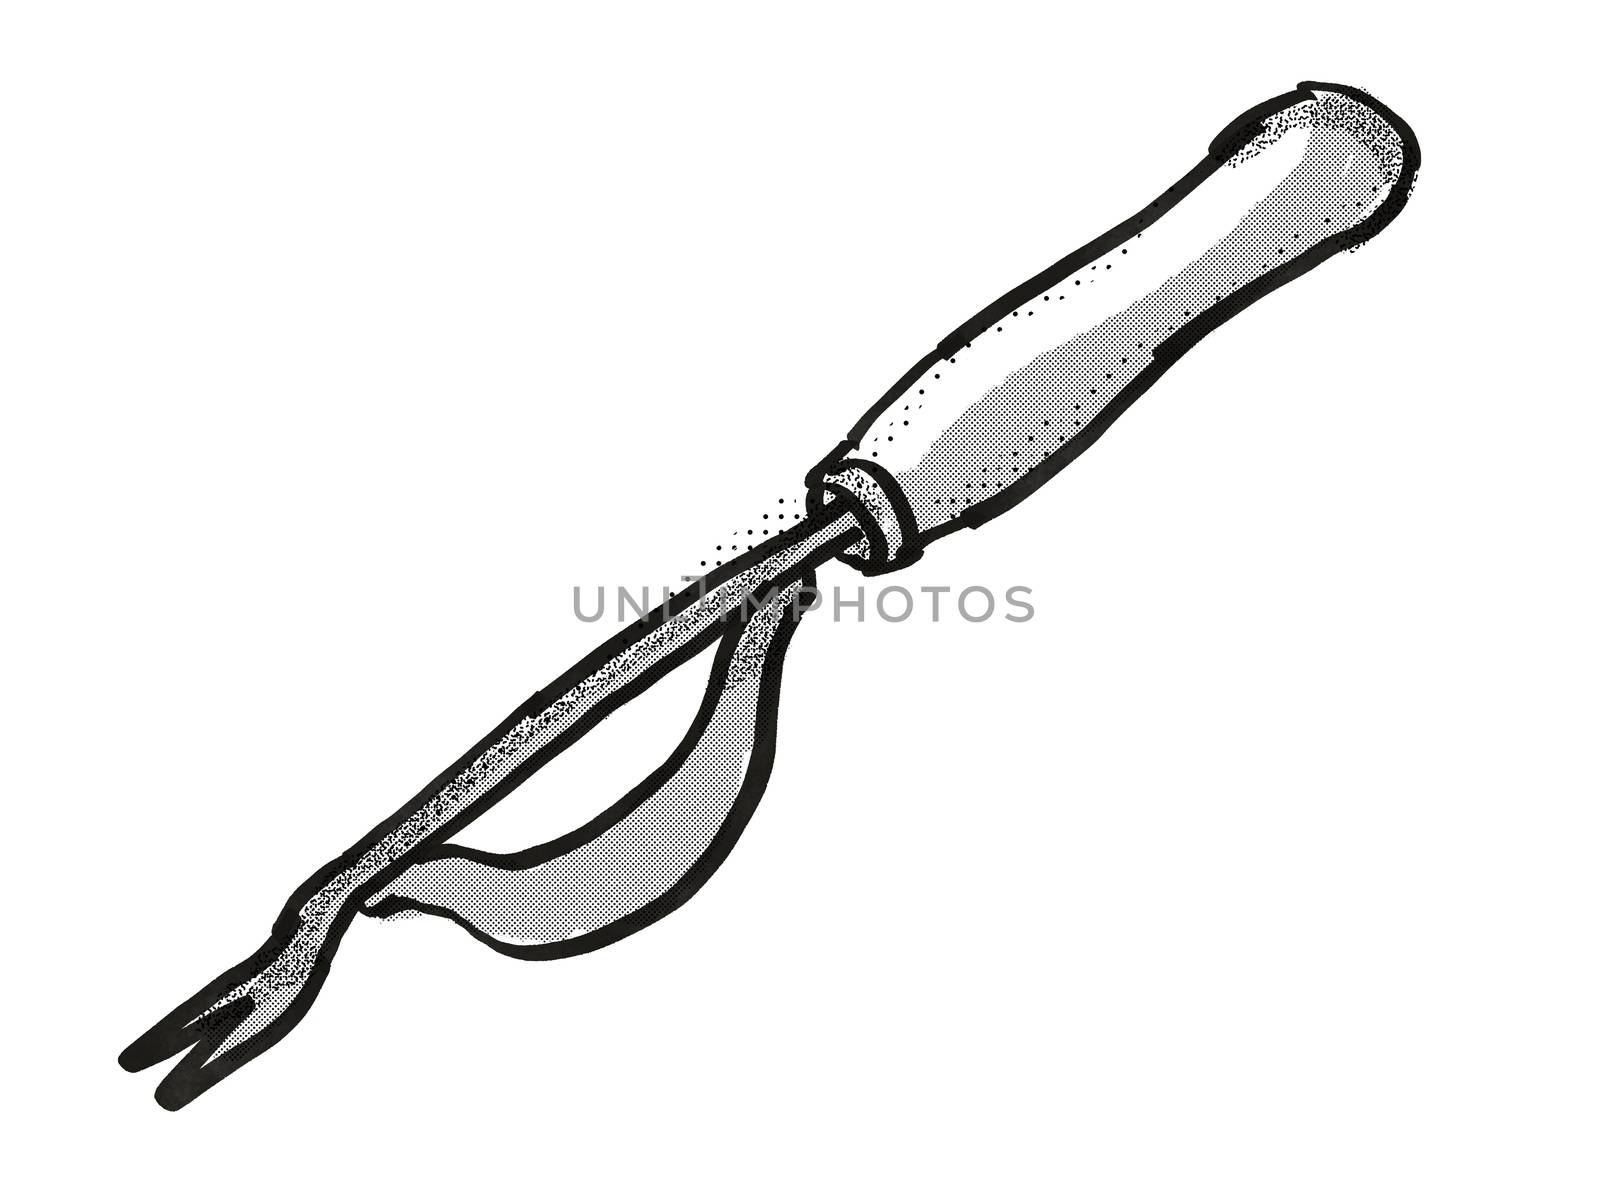 Retro cartoon style drawing of a hand weeder , a garden or gardening tool equipment on isolated white background done in black and white